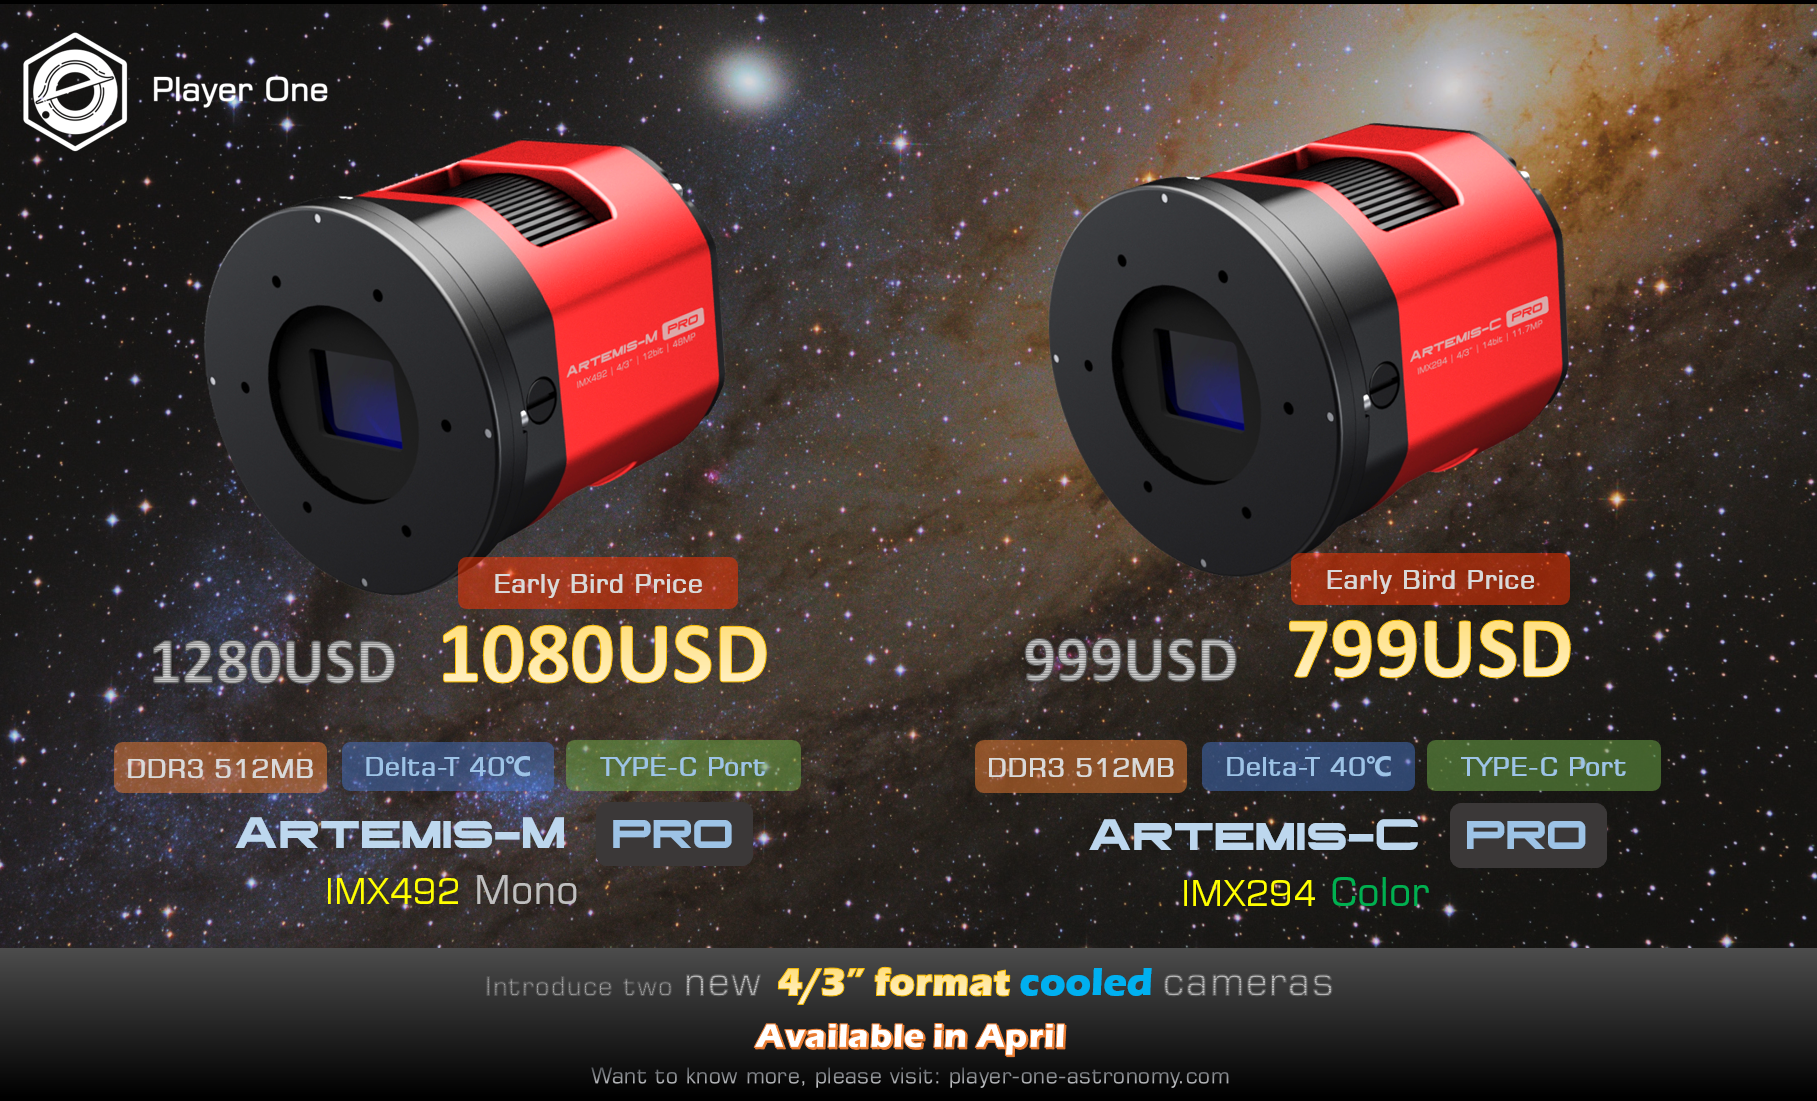 NEW Artemis Pro series – IMX294/492 cooled cameras released TODAY!